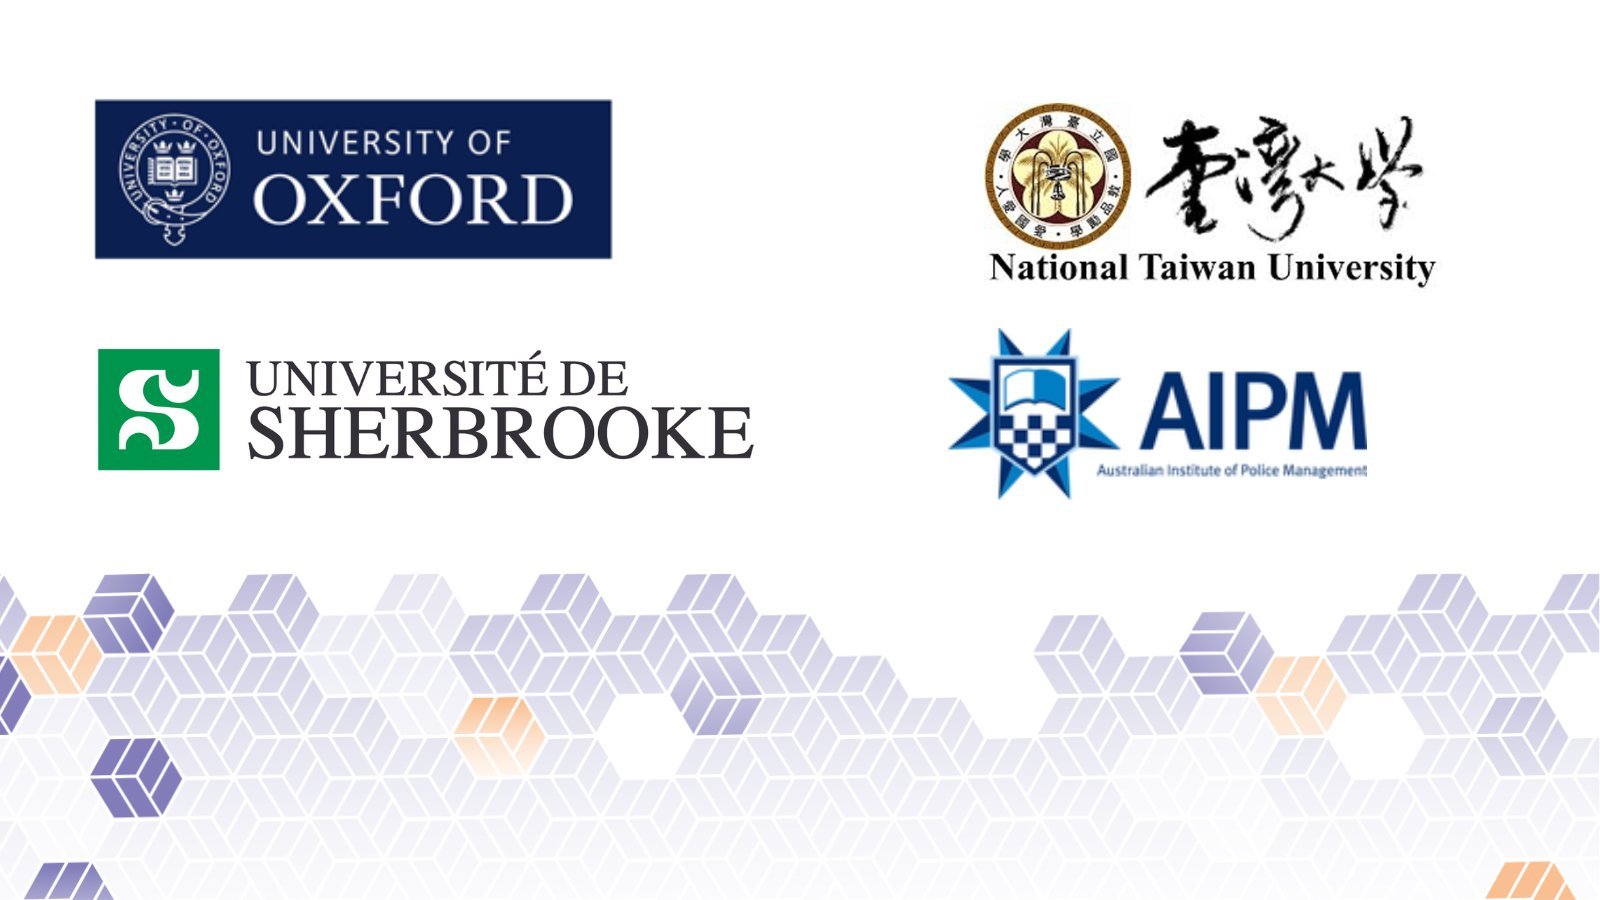 The logos of the Universities who won the collaboration awards.